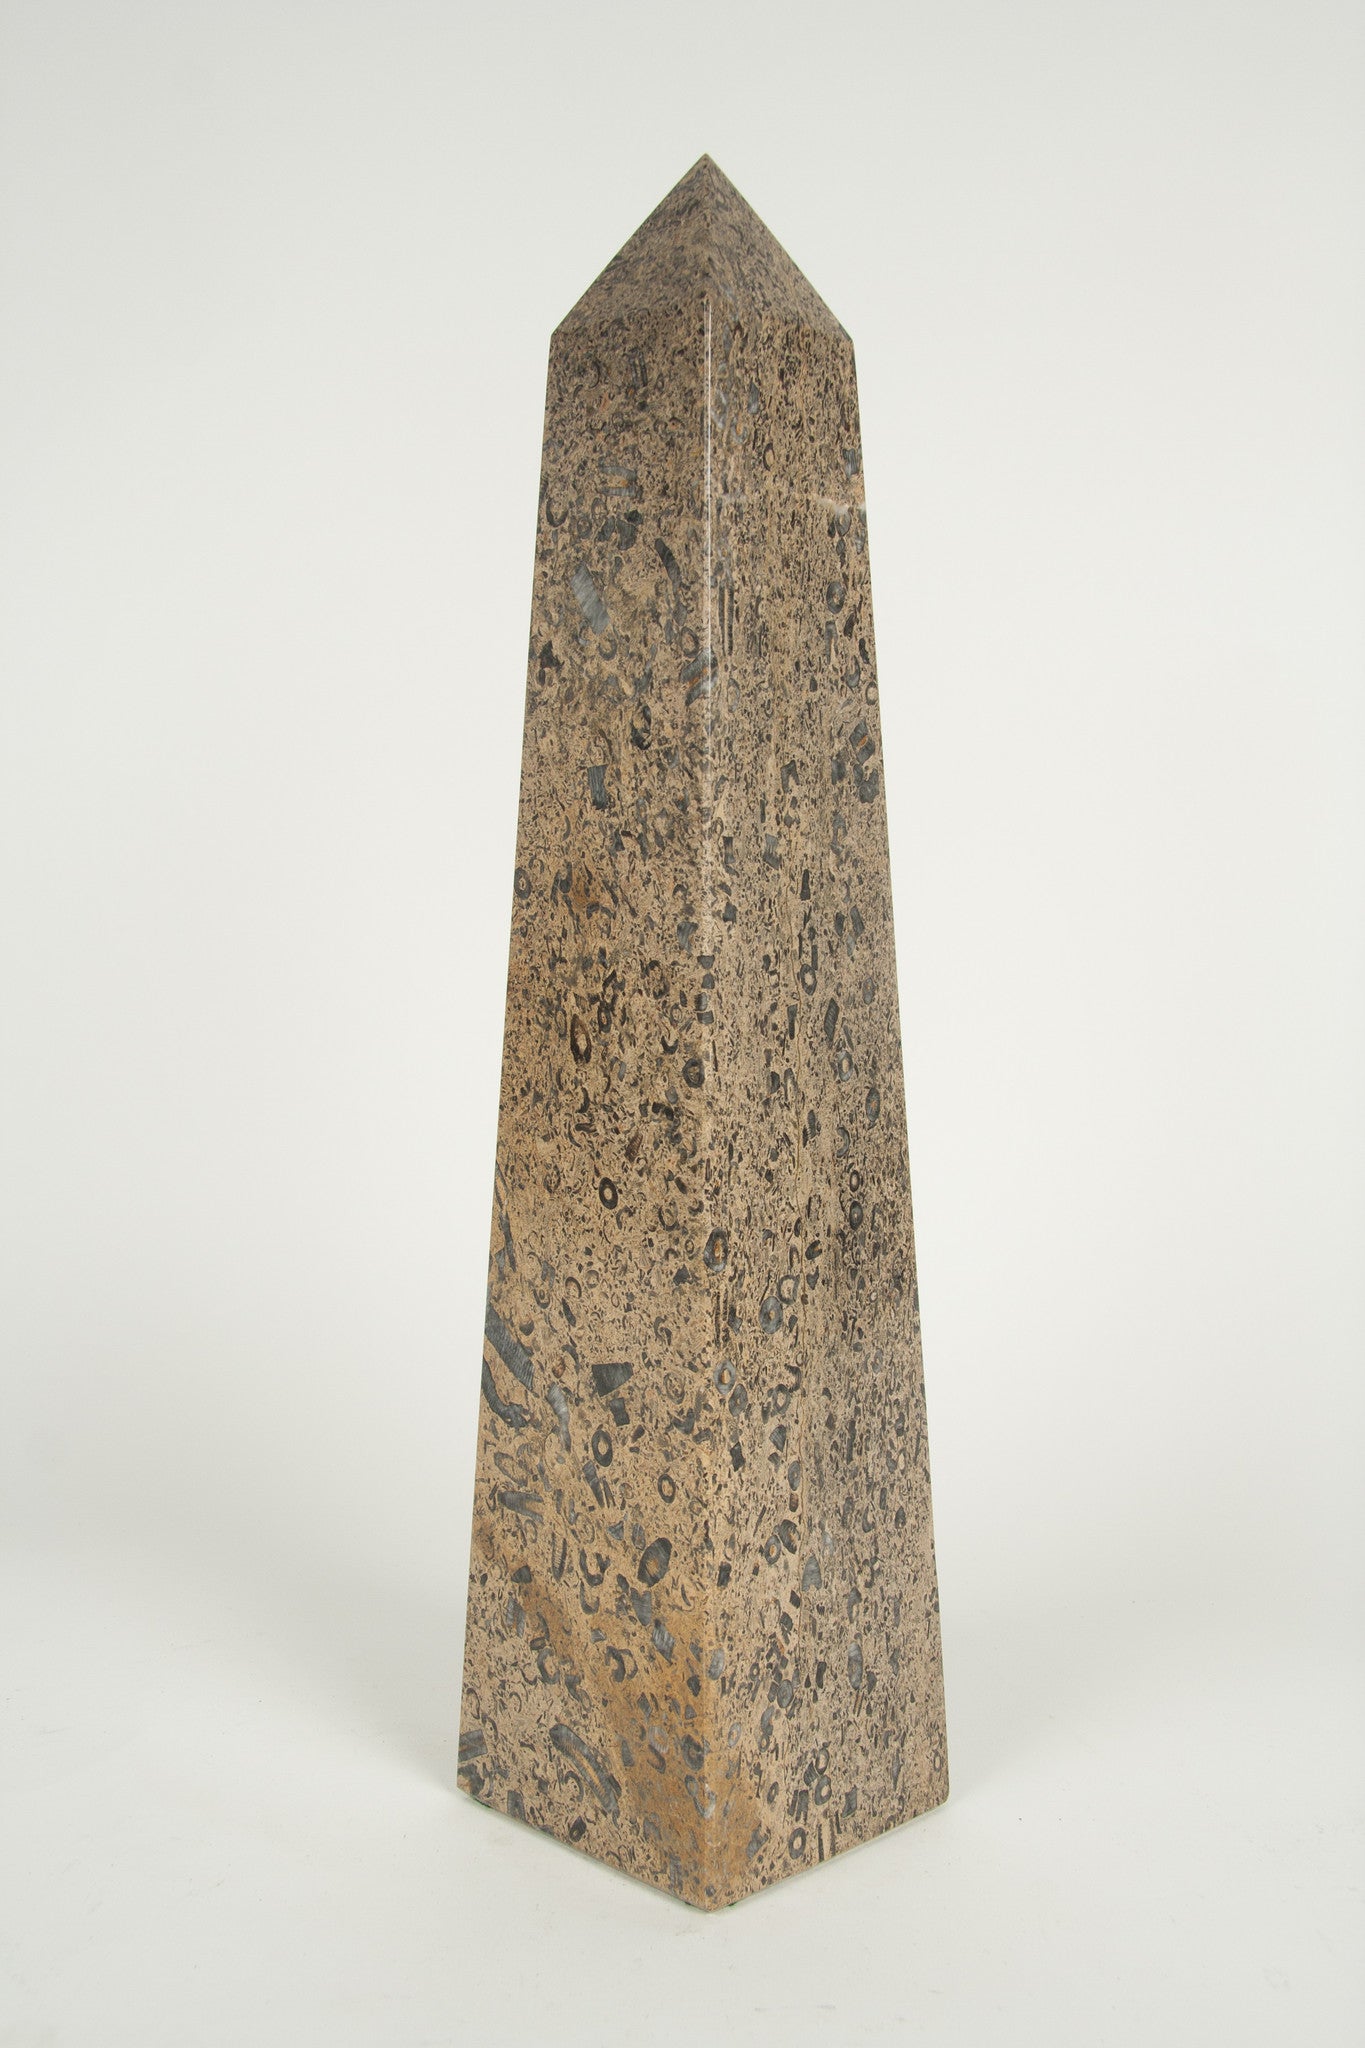 A Granite Obelisk with Fossilized Crustaceans